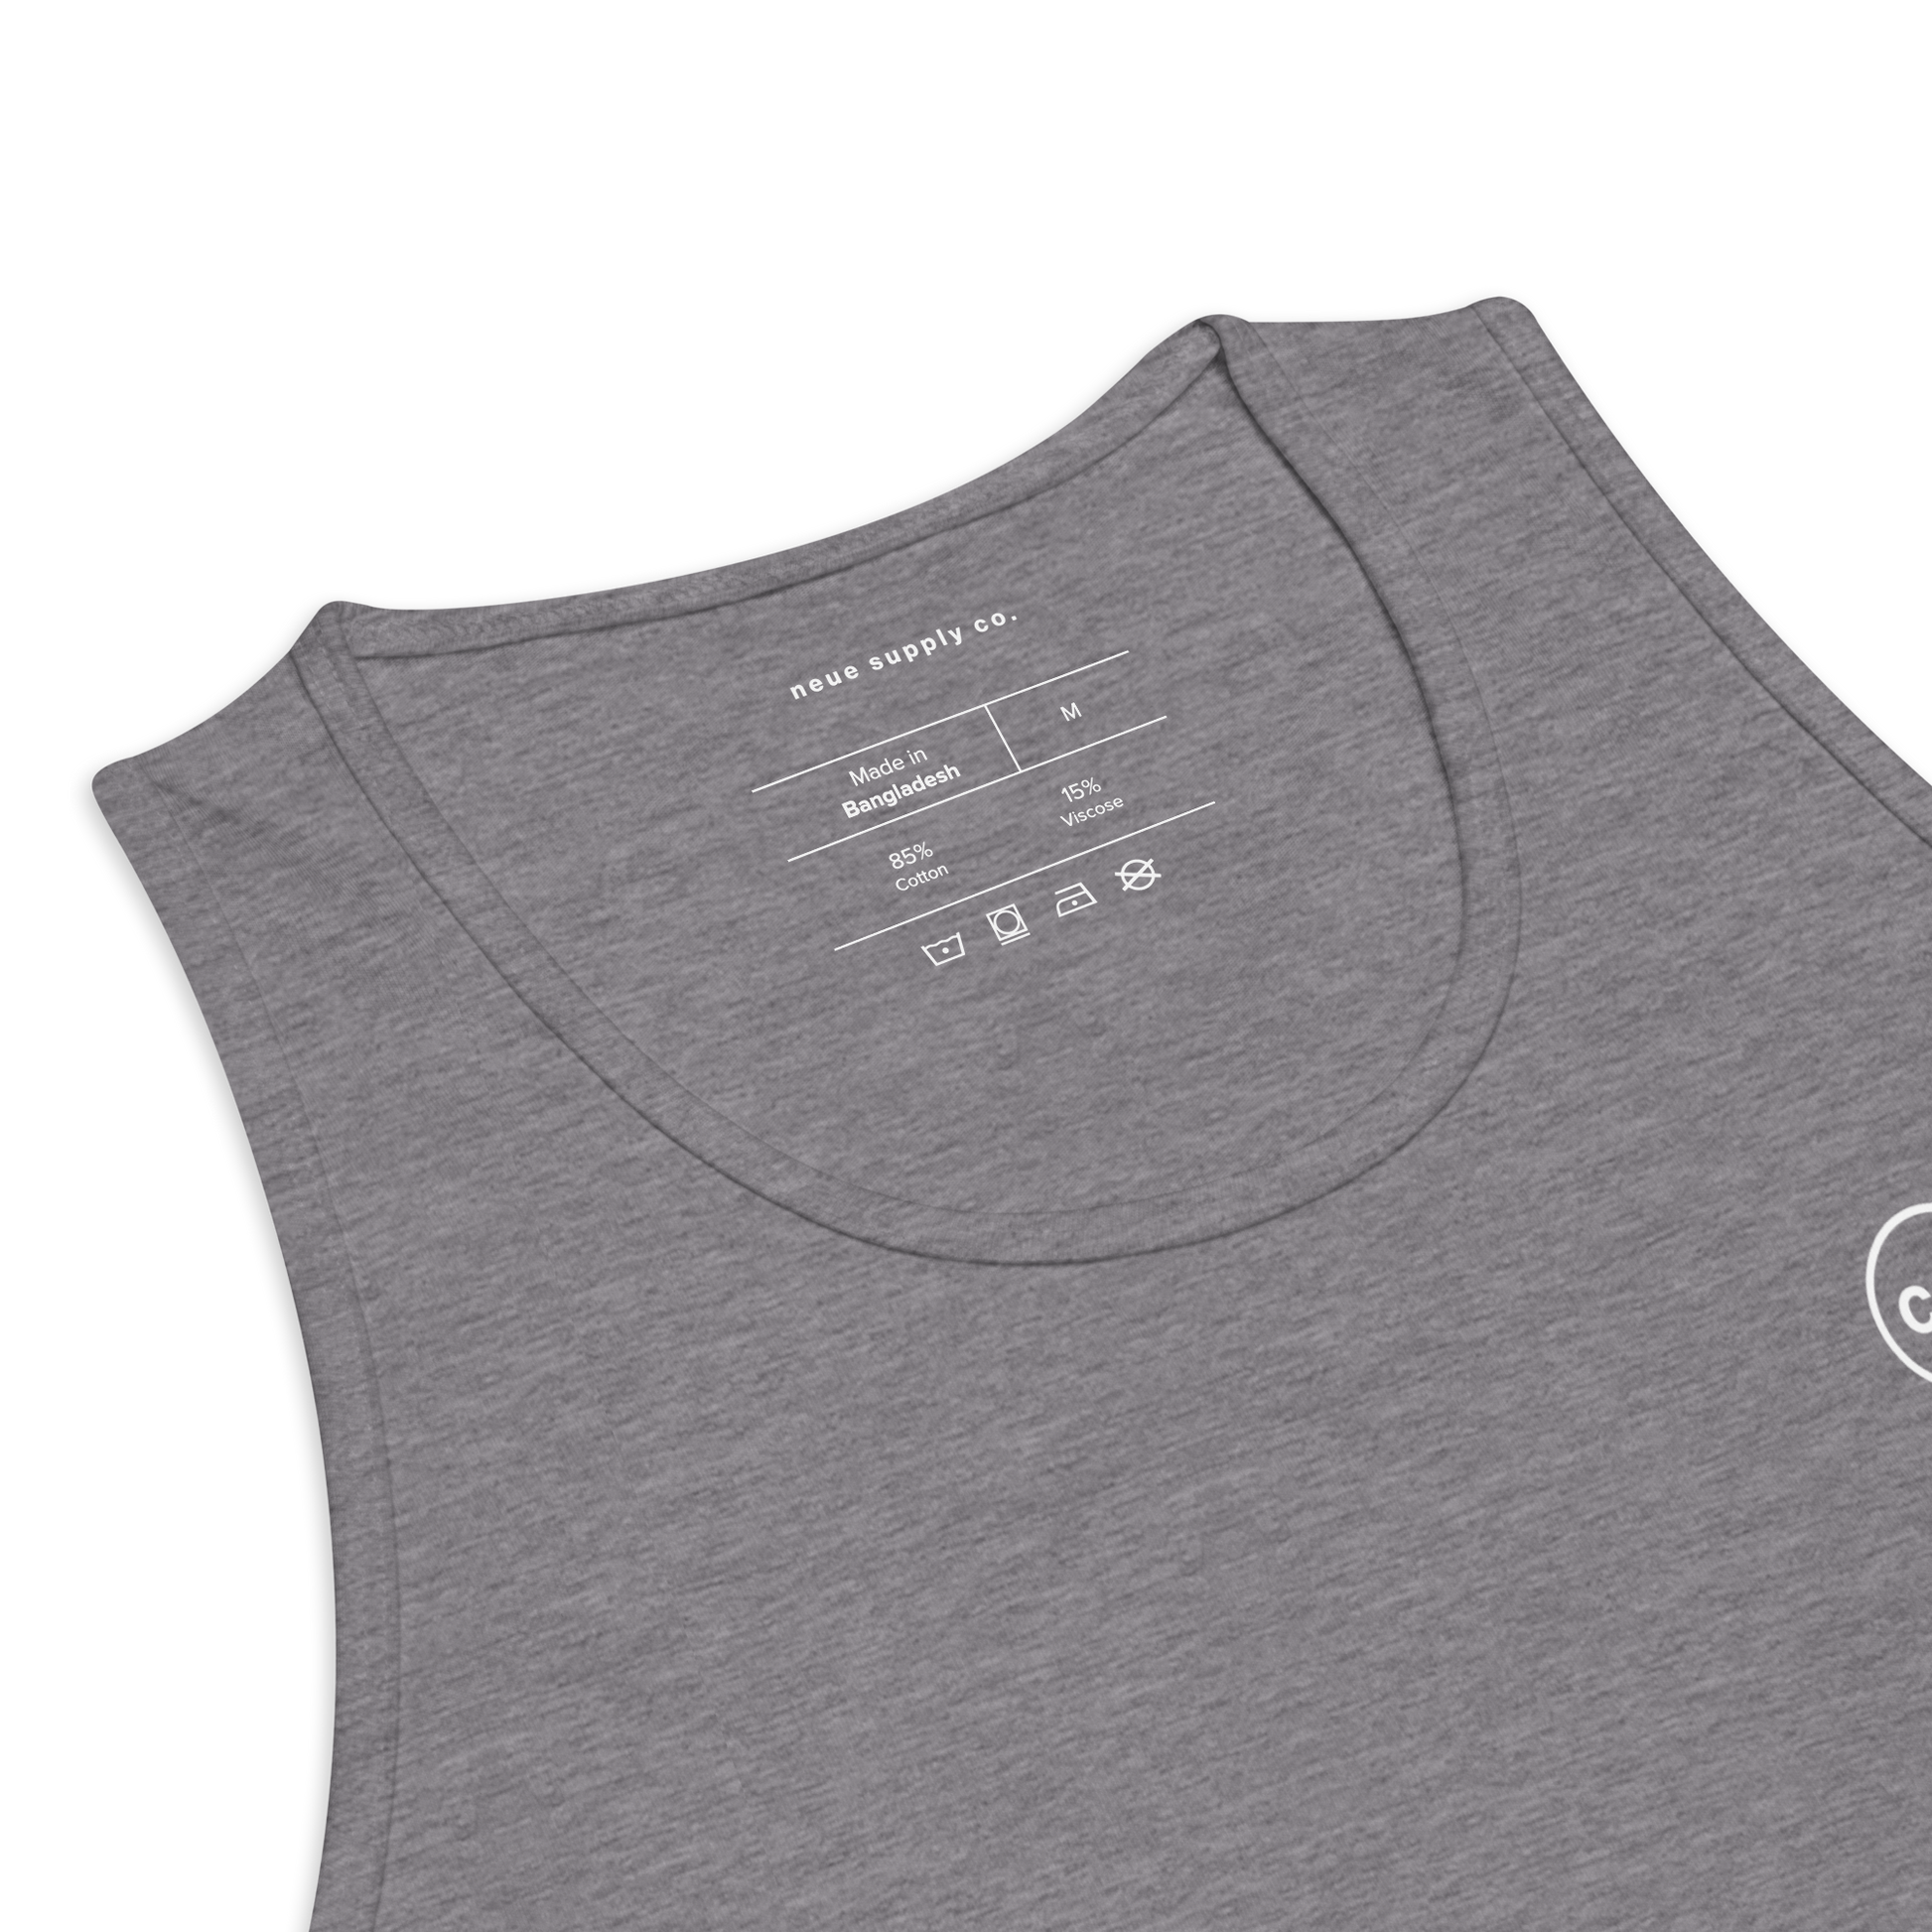 Neue Supply Co. Essential Workout Tank Top for Men in Athletic Heather Gray detail view